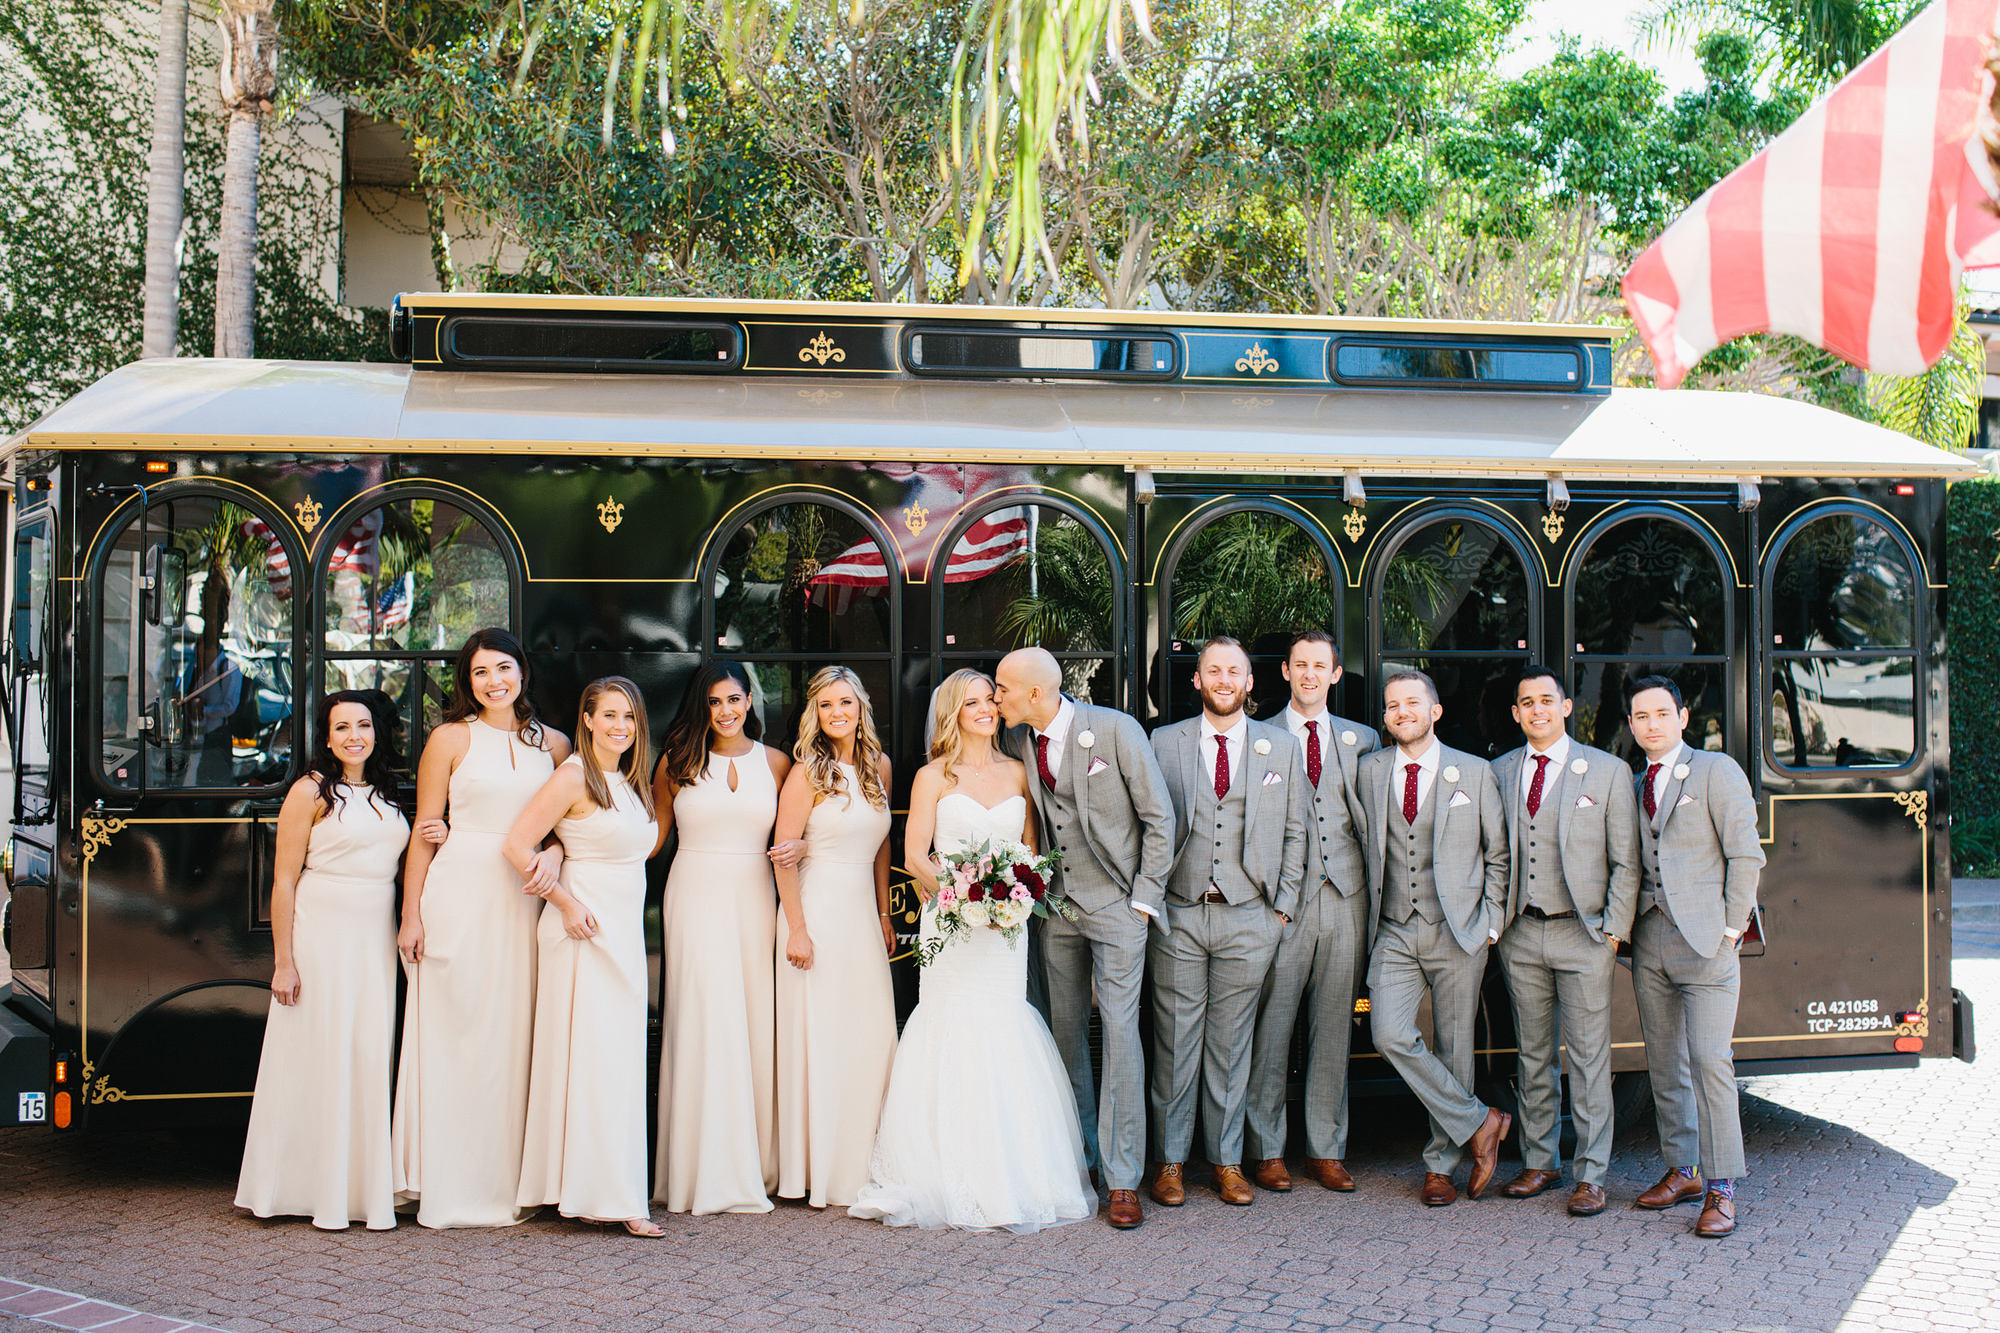 The bridal party rode a trolley to the Courthouse. 